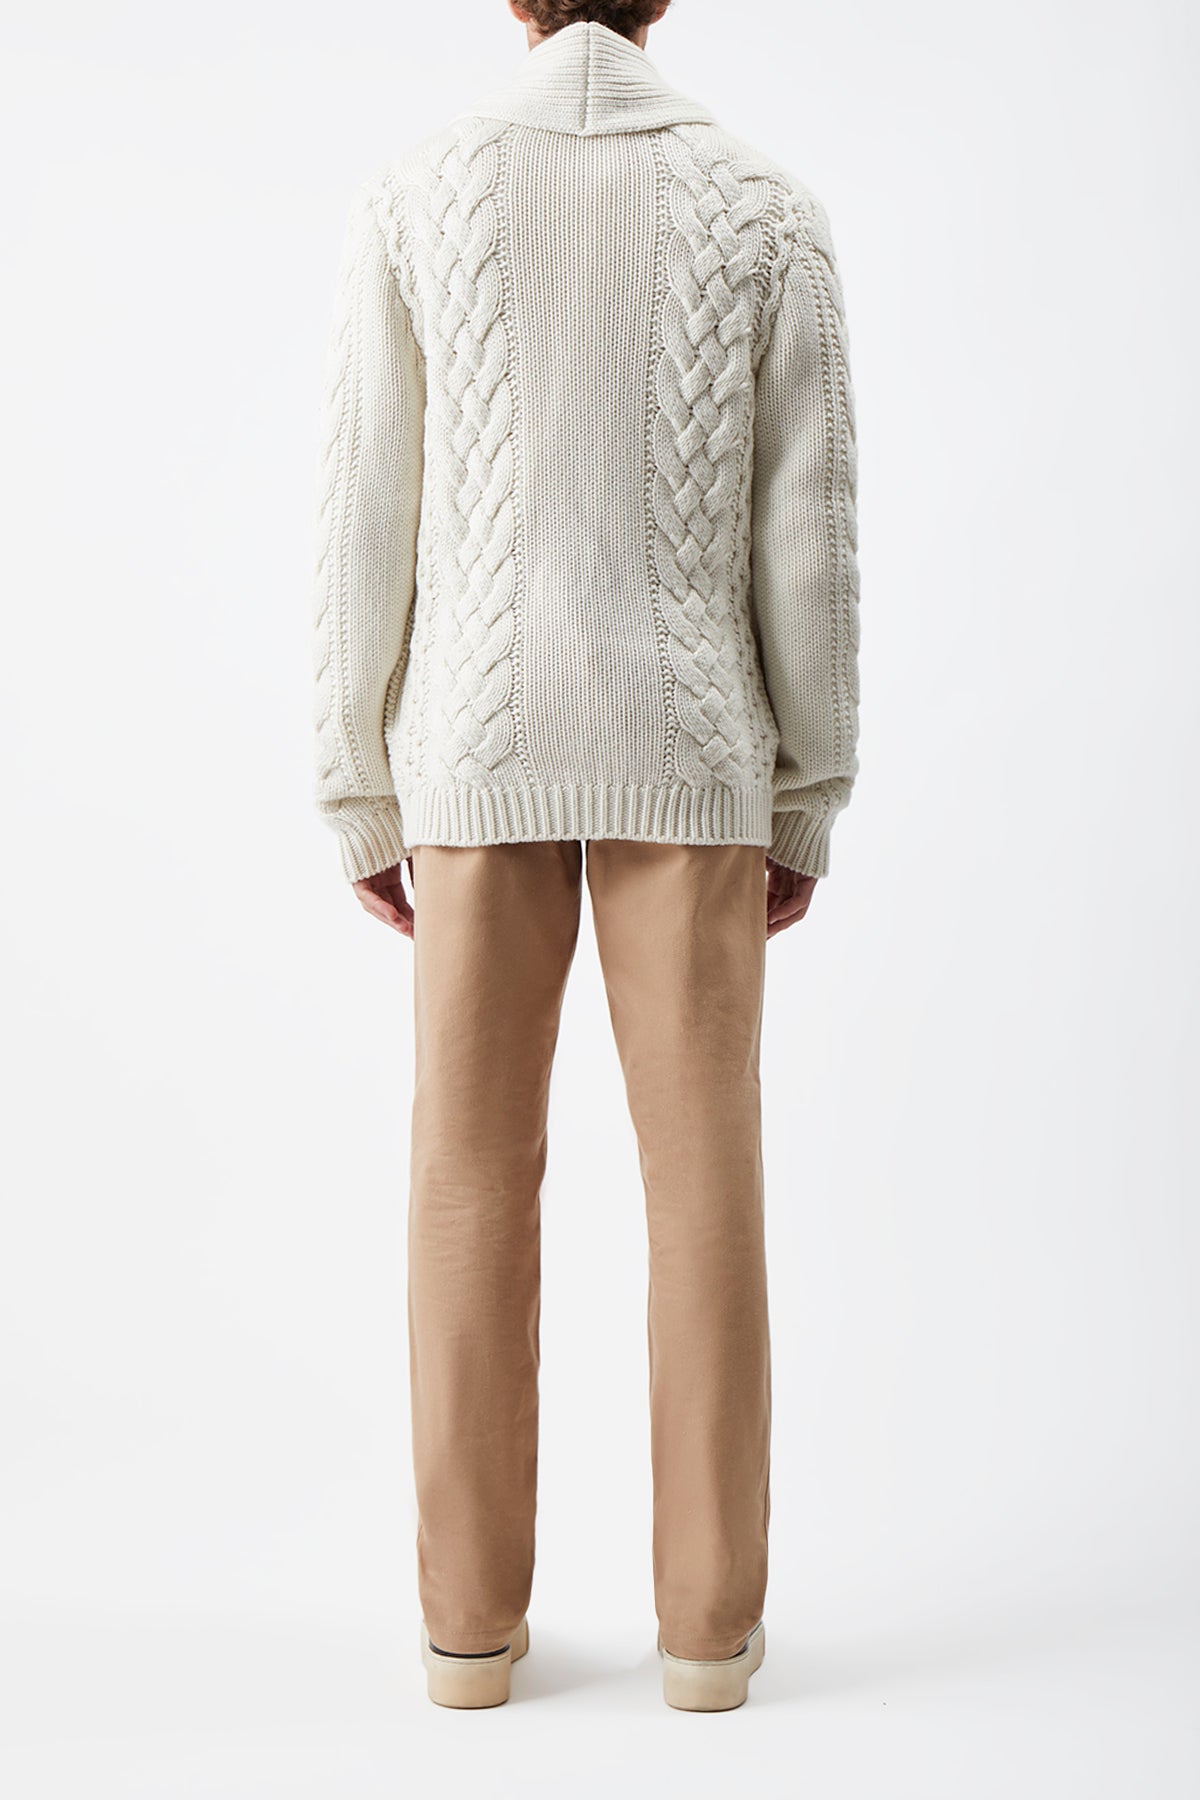 Casa Knit Cardigan in Ivory Cashmere